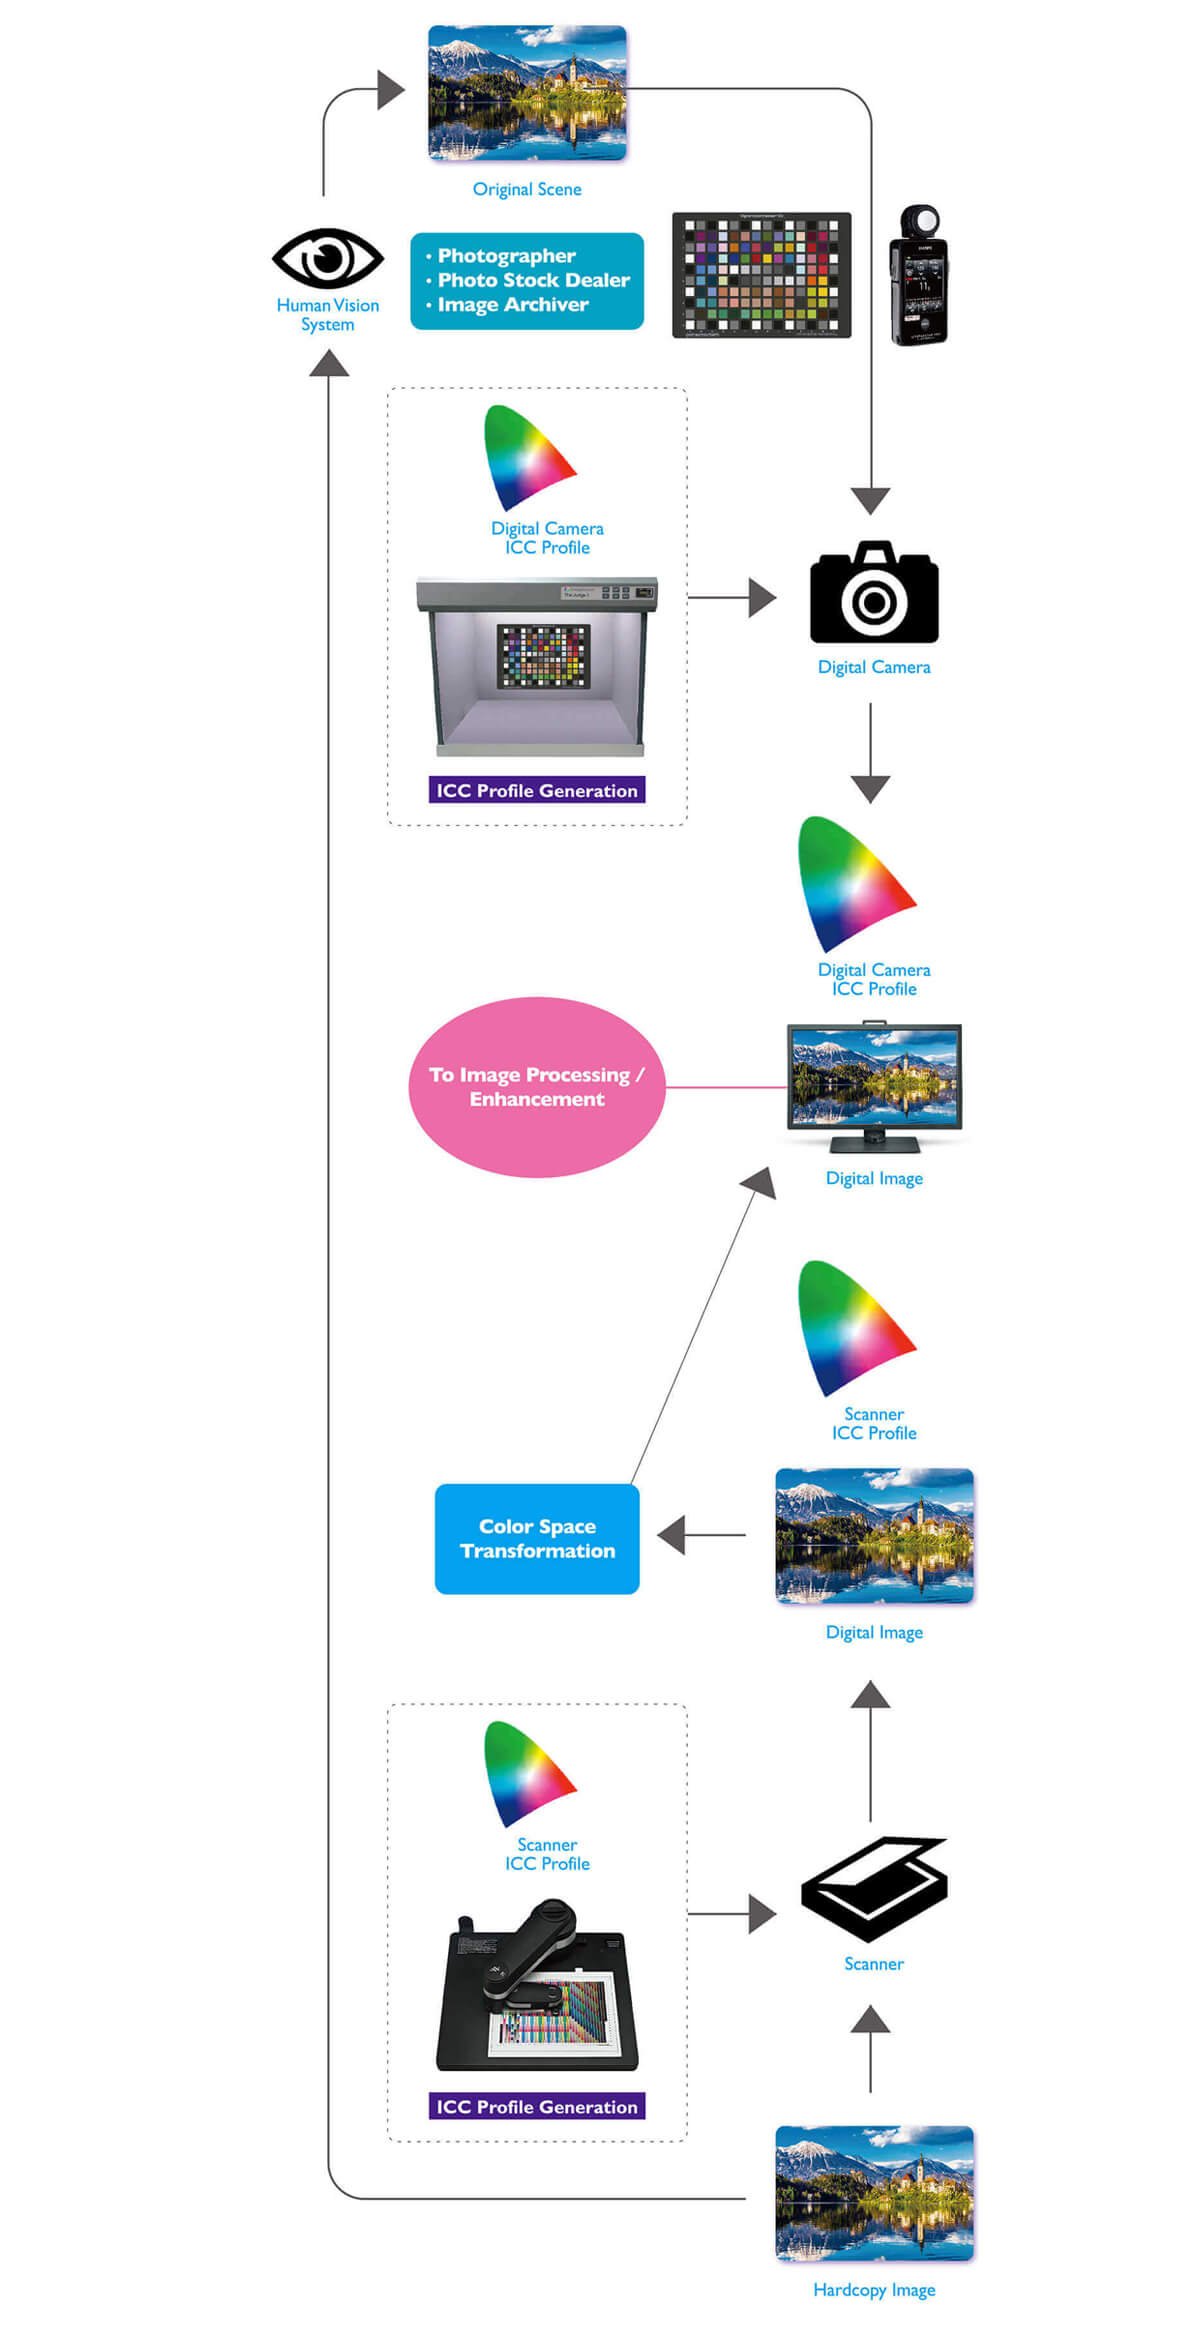 Typical photographer’s color management workflow.